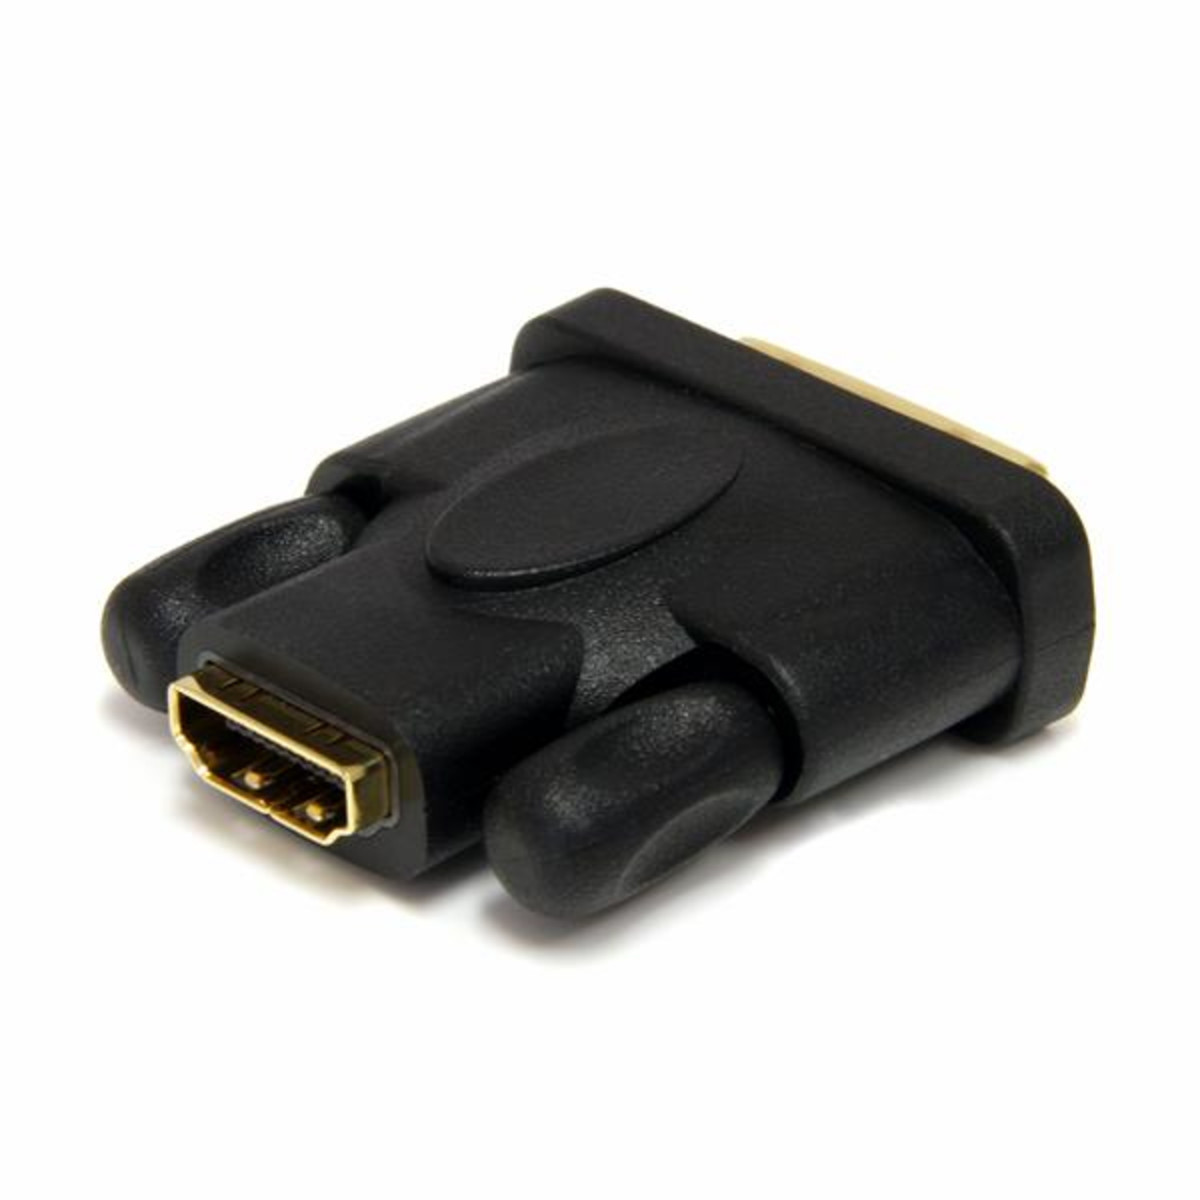 HDMI to DVI-D Video Cable Adapter - F/M